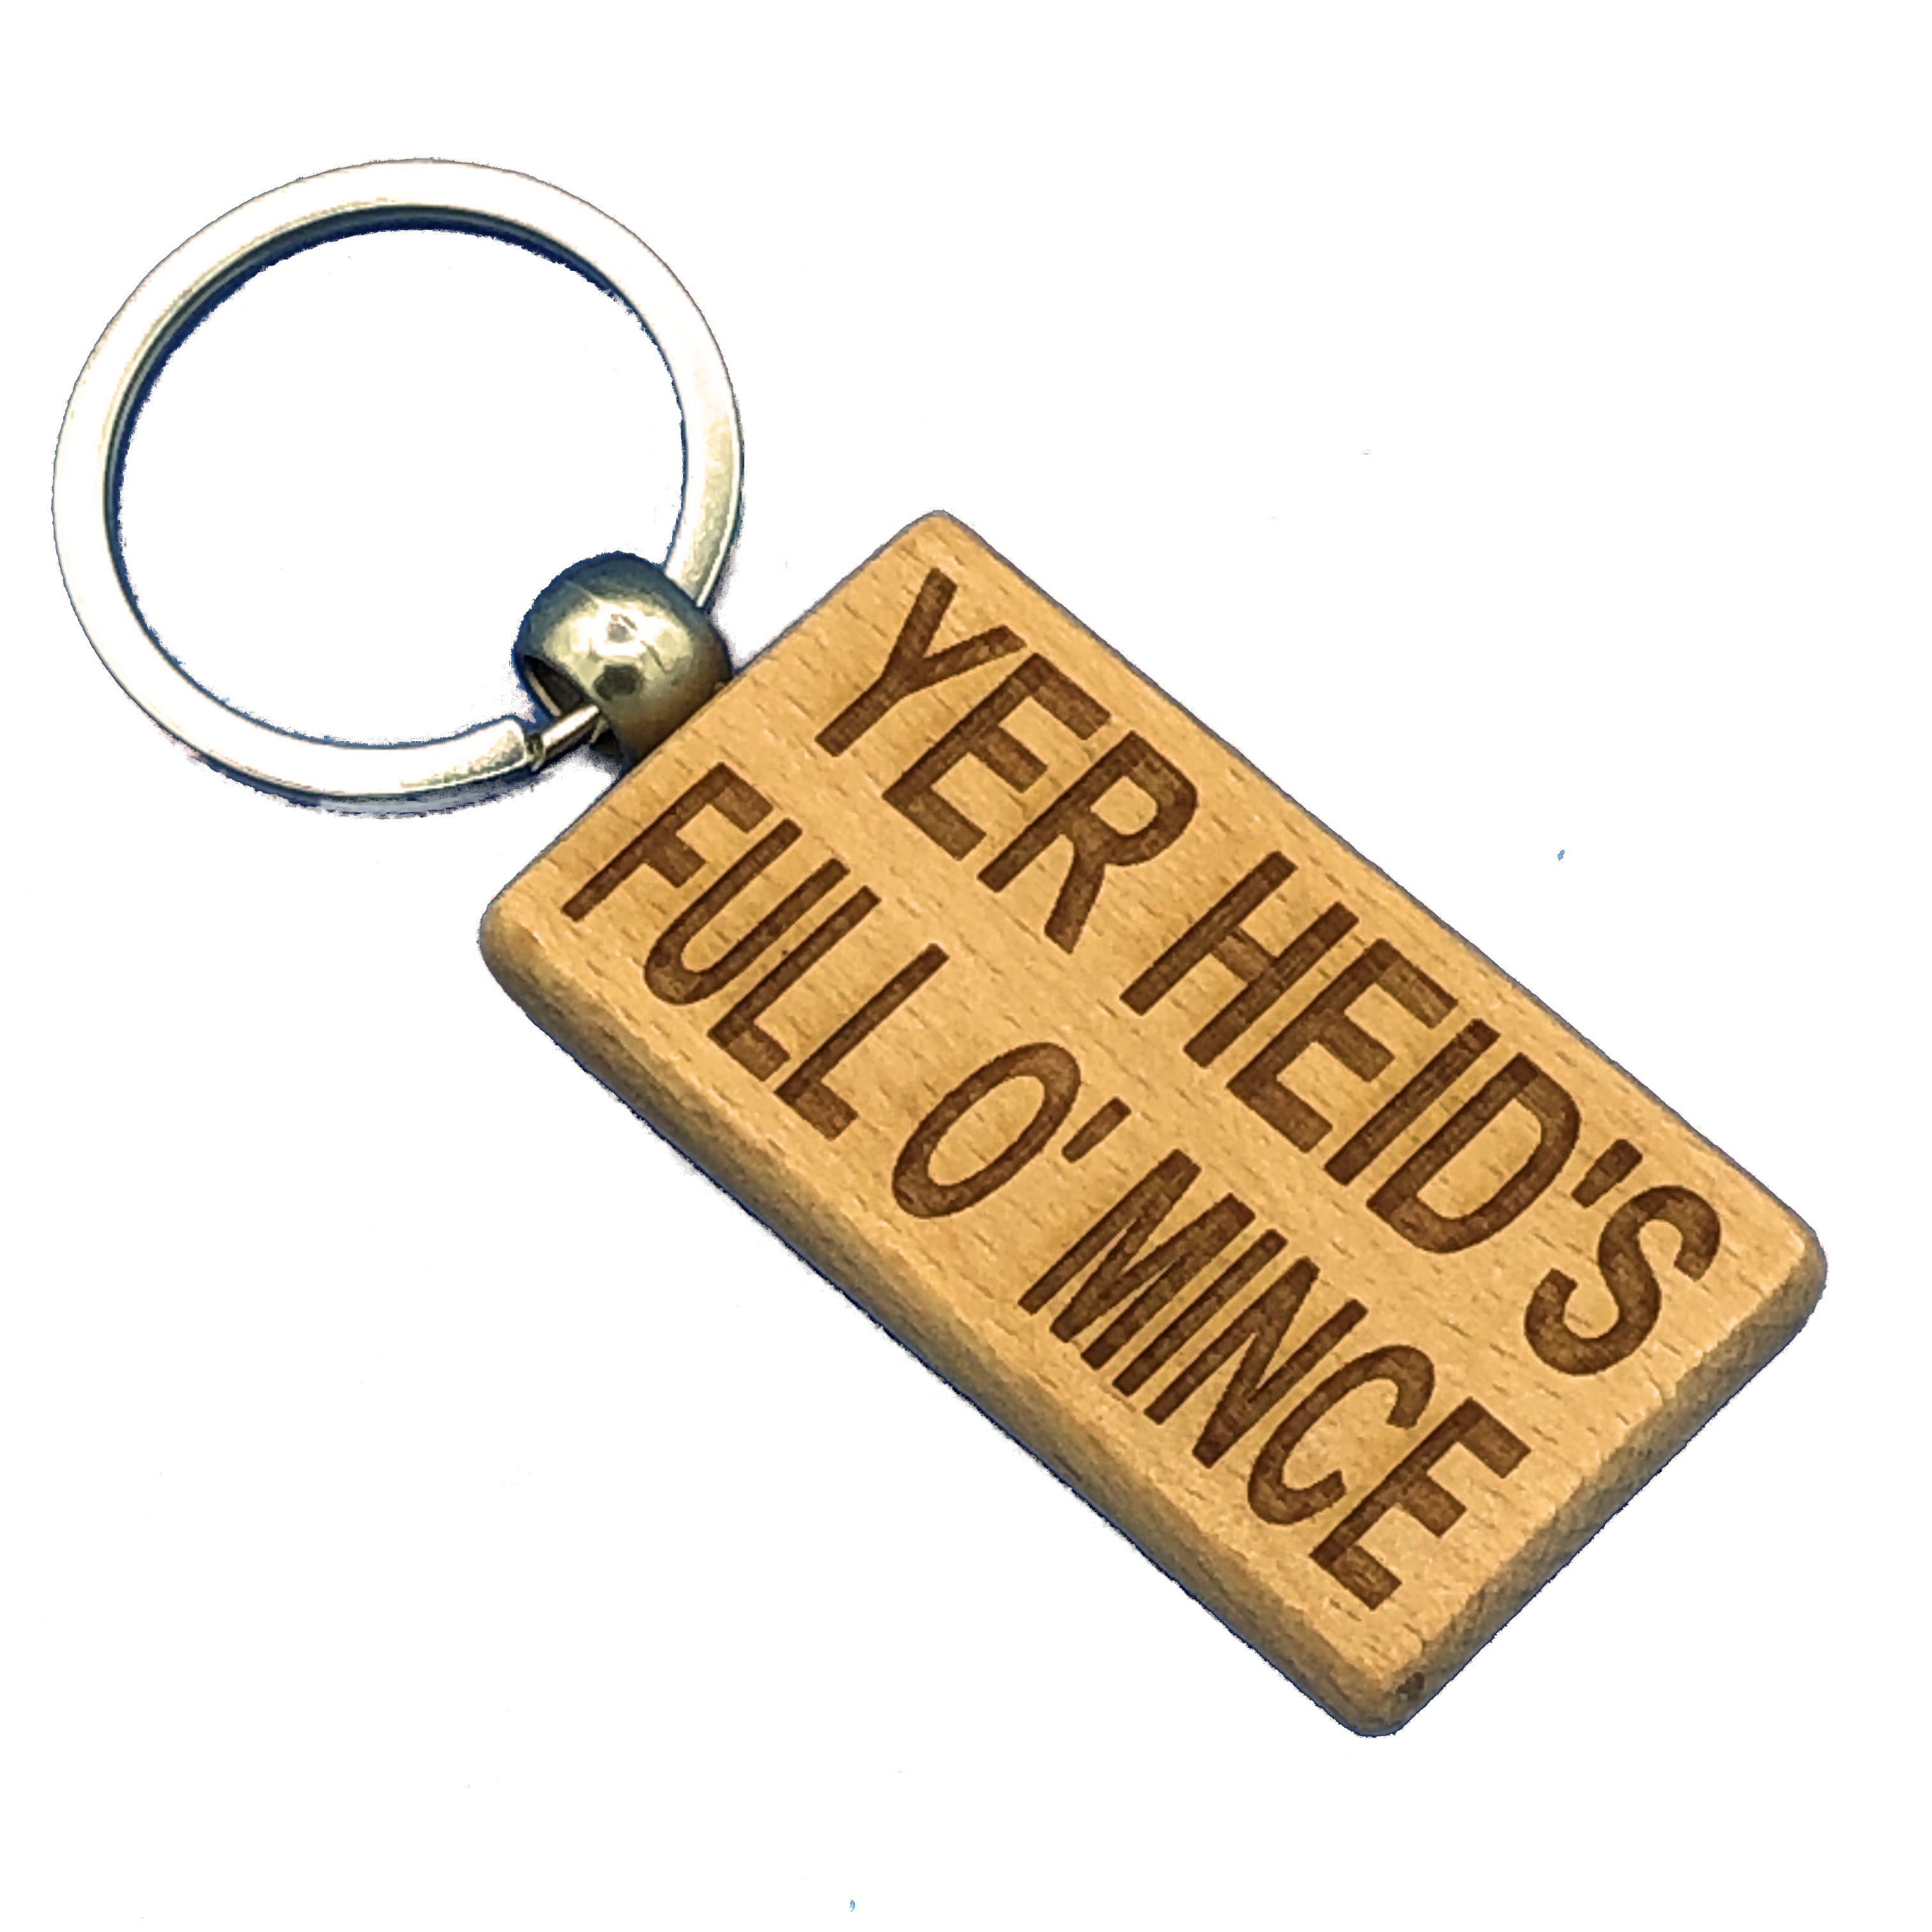 Wooden keyring laser engraved with Scottish dialect - yer heid's full o' mince